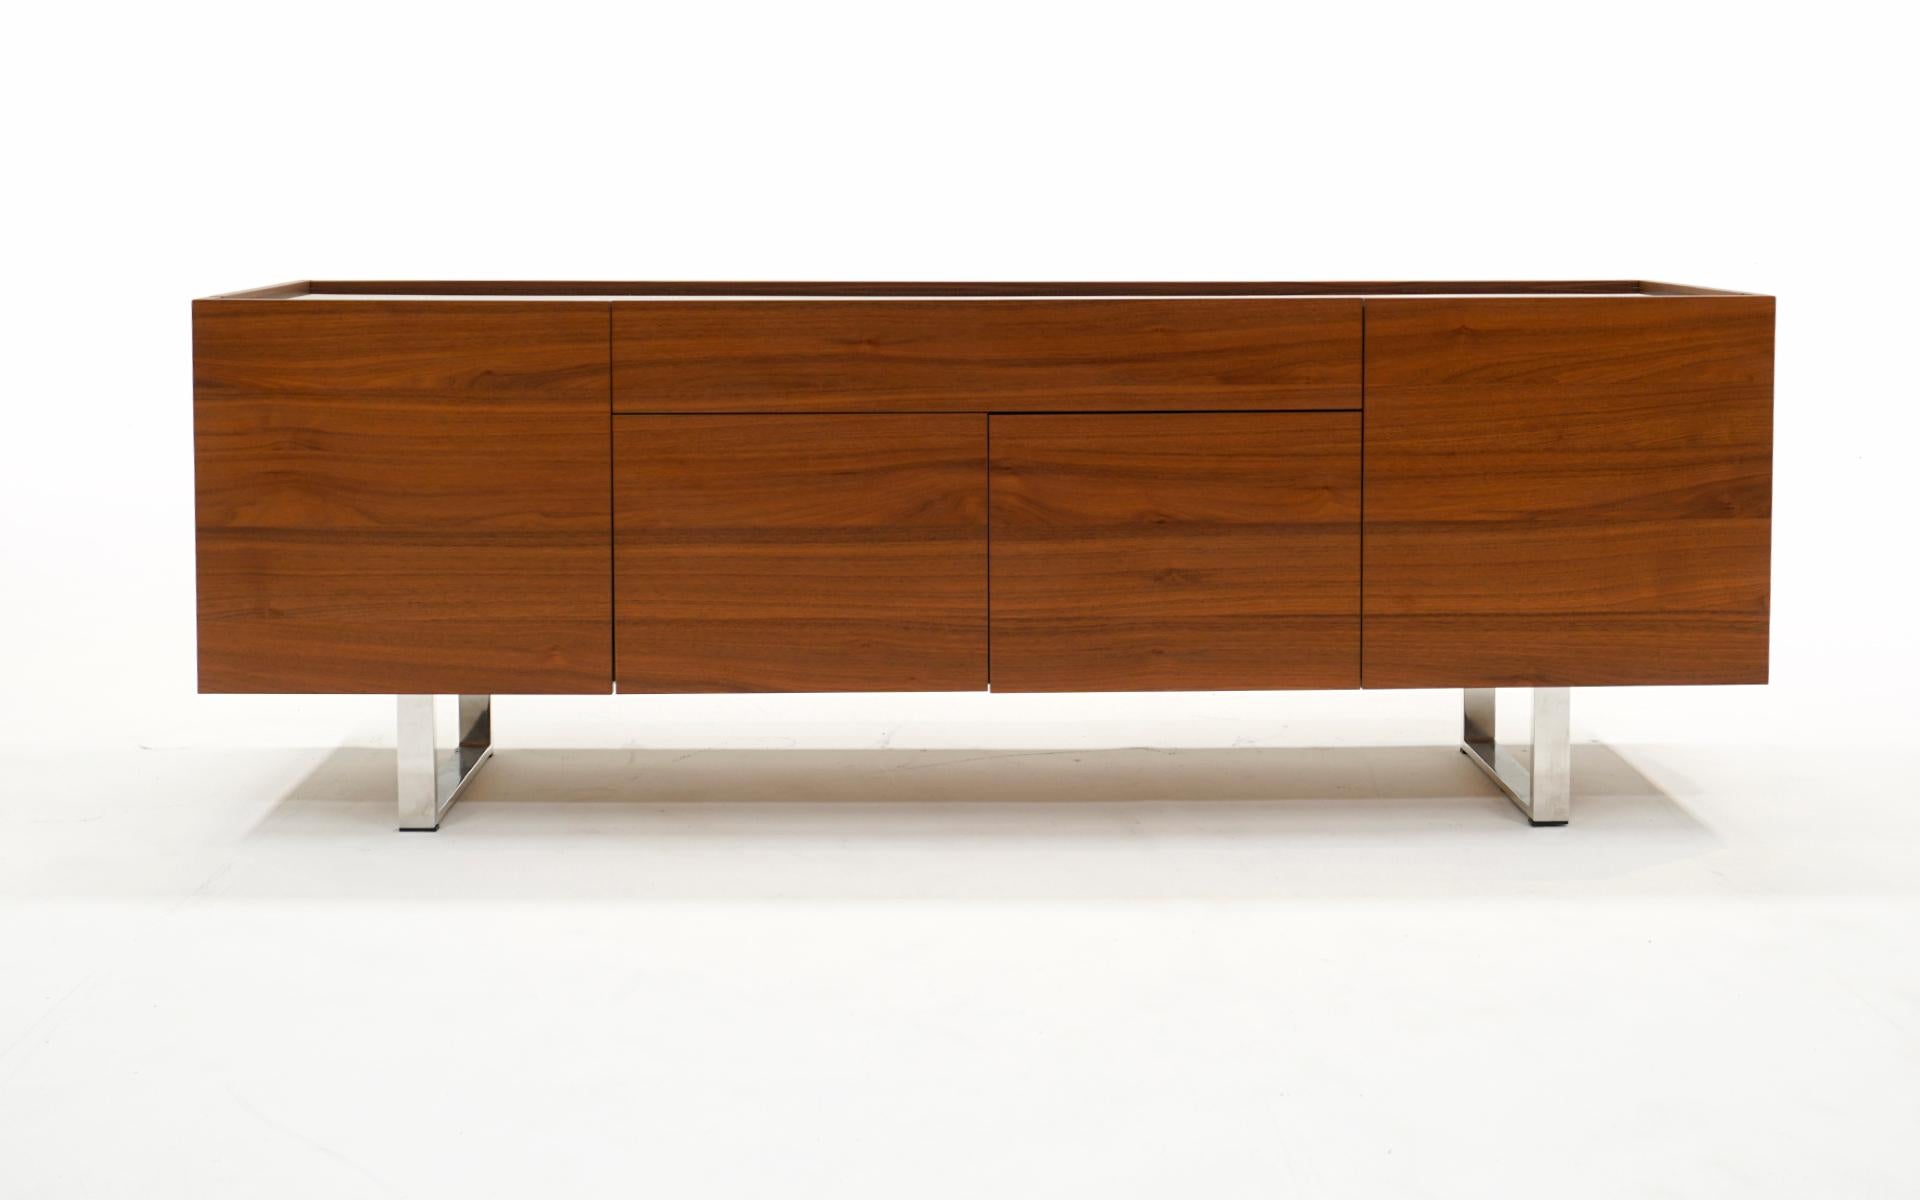 Walnut credenza / sideboard / buffet / media cabinet by Calligaris, Italy.  The black glass top is attached and inset 1/2 inch.  The center doors open to reveal a large storage space while the side doors reveal an adjustable glass shelf.  The large